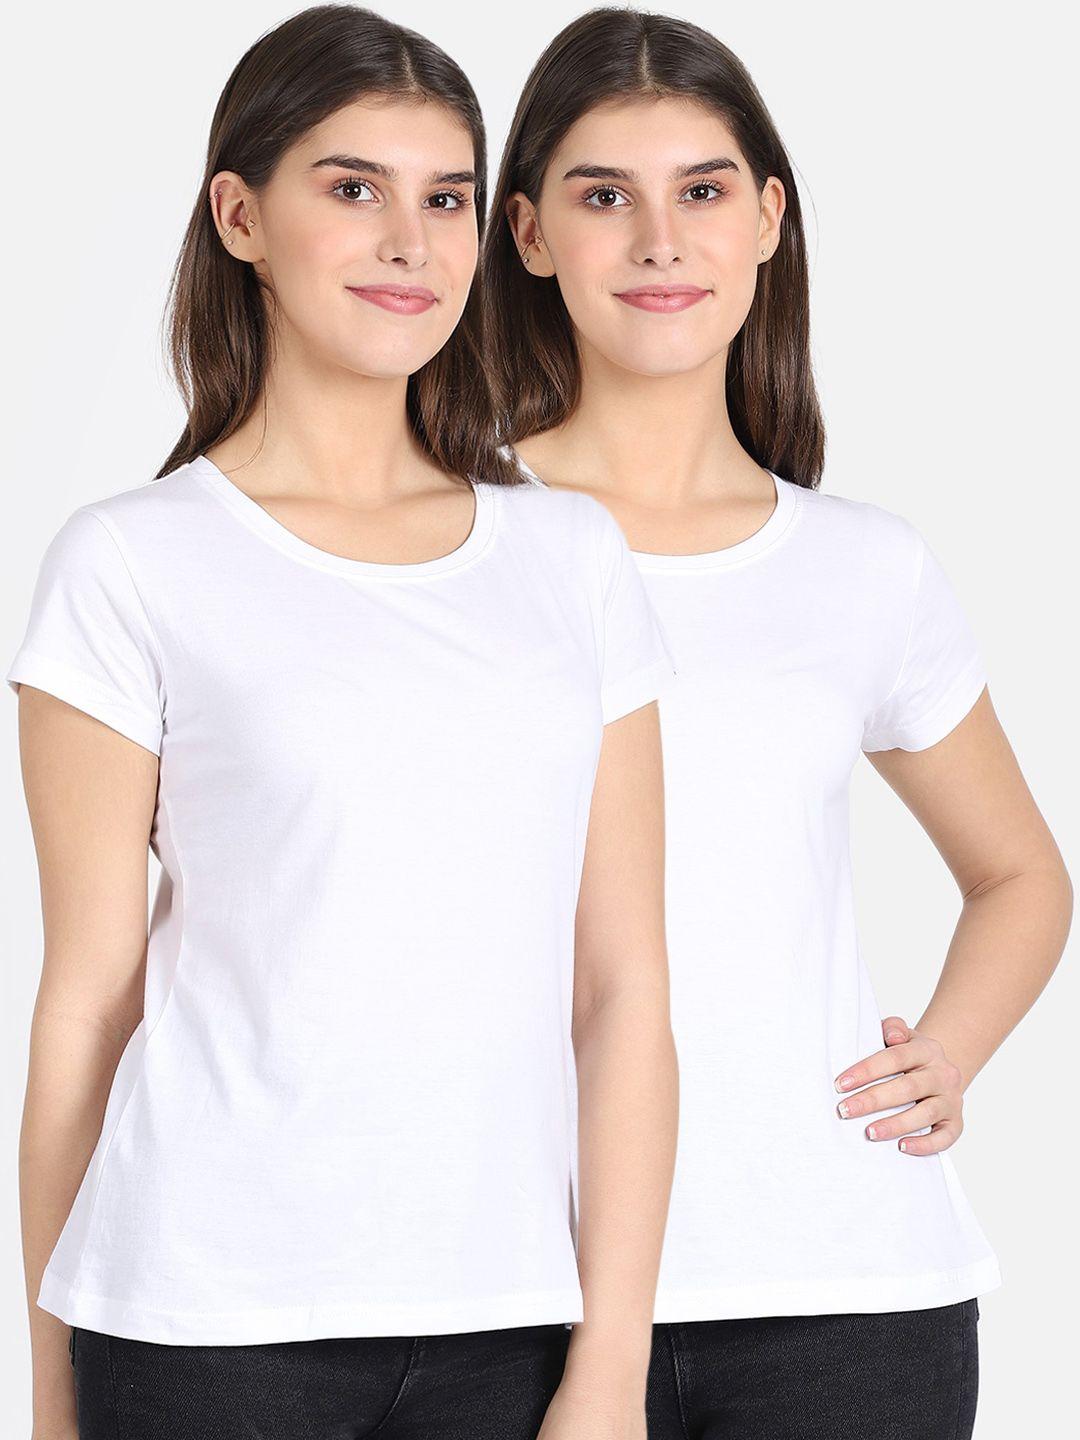 dyca-women-pack-of-2-white-solid-round-neck-t-shirt